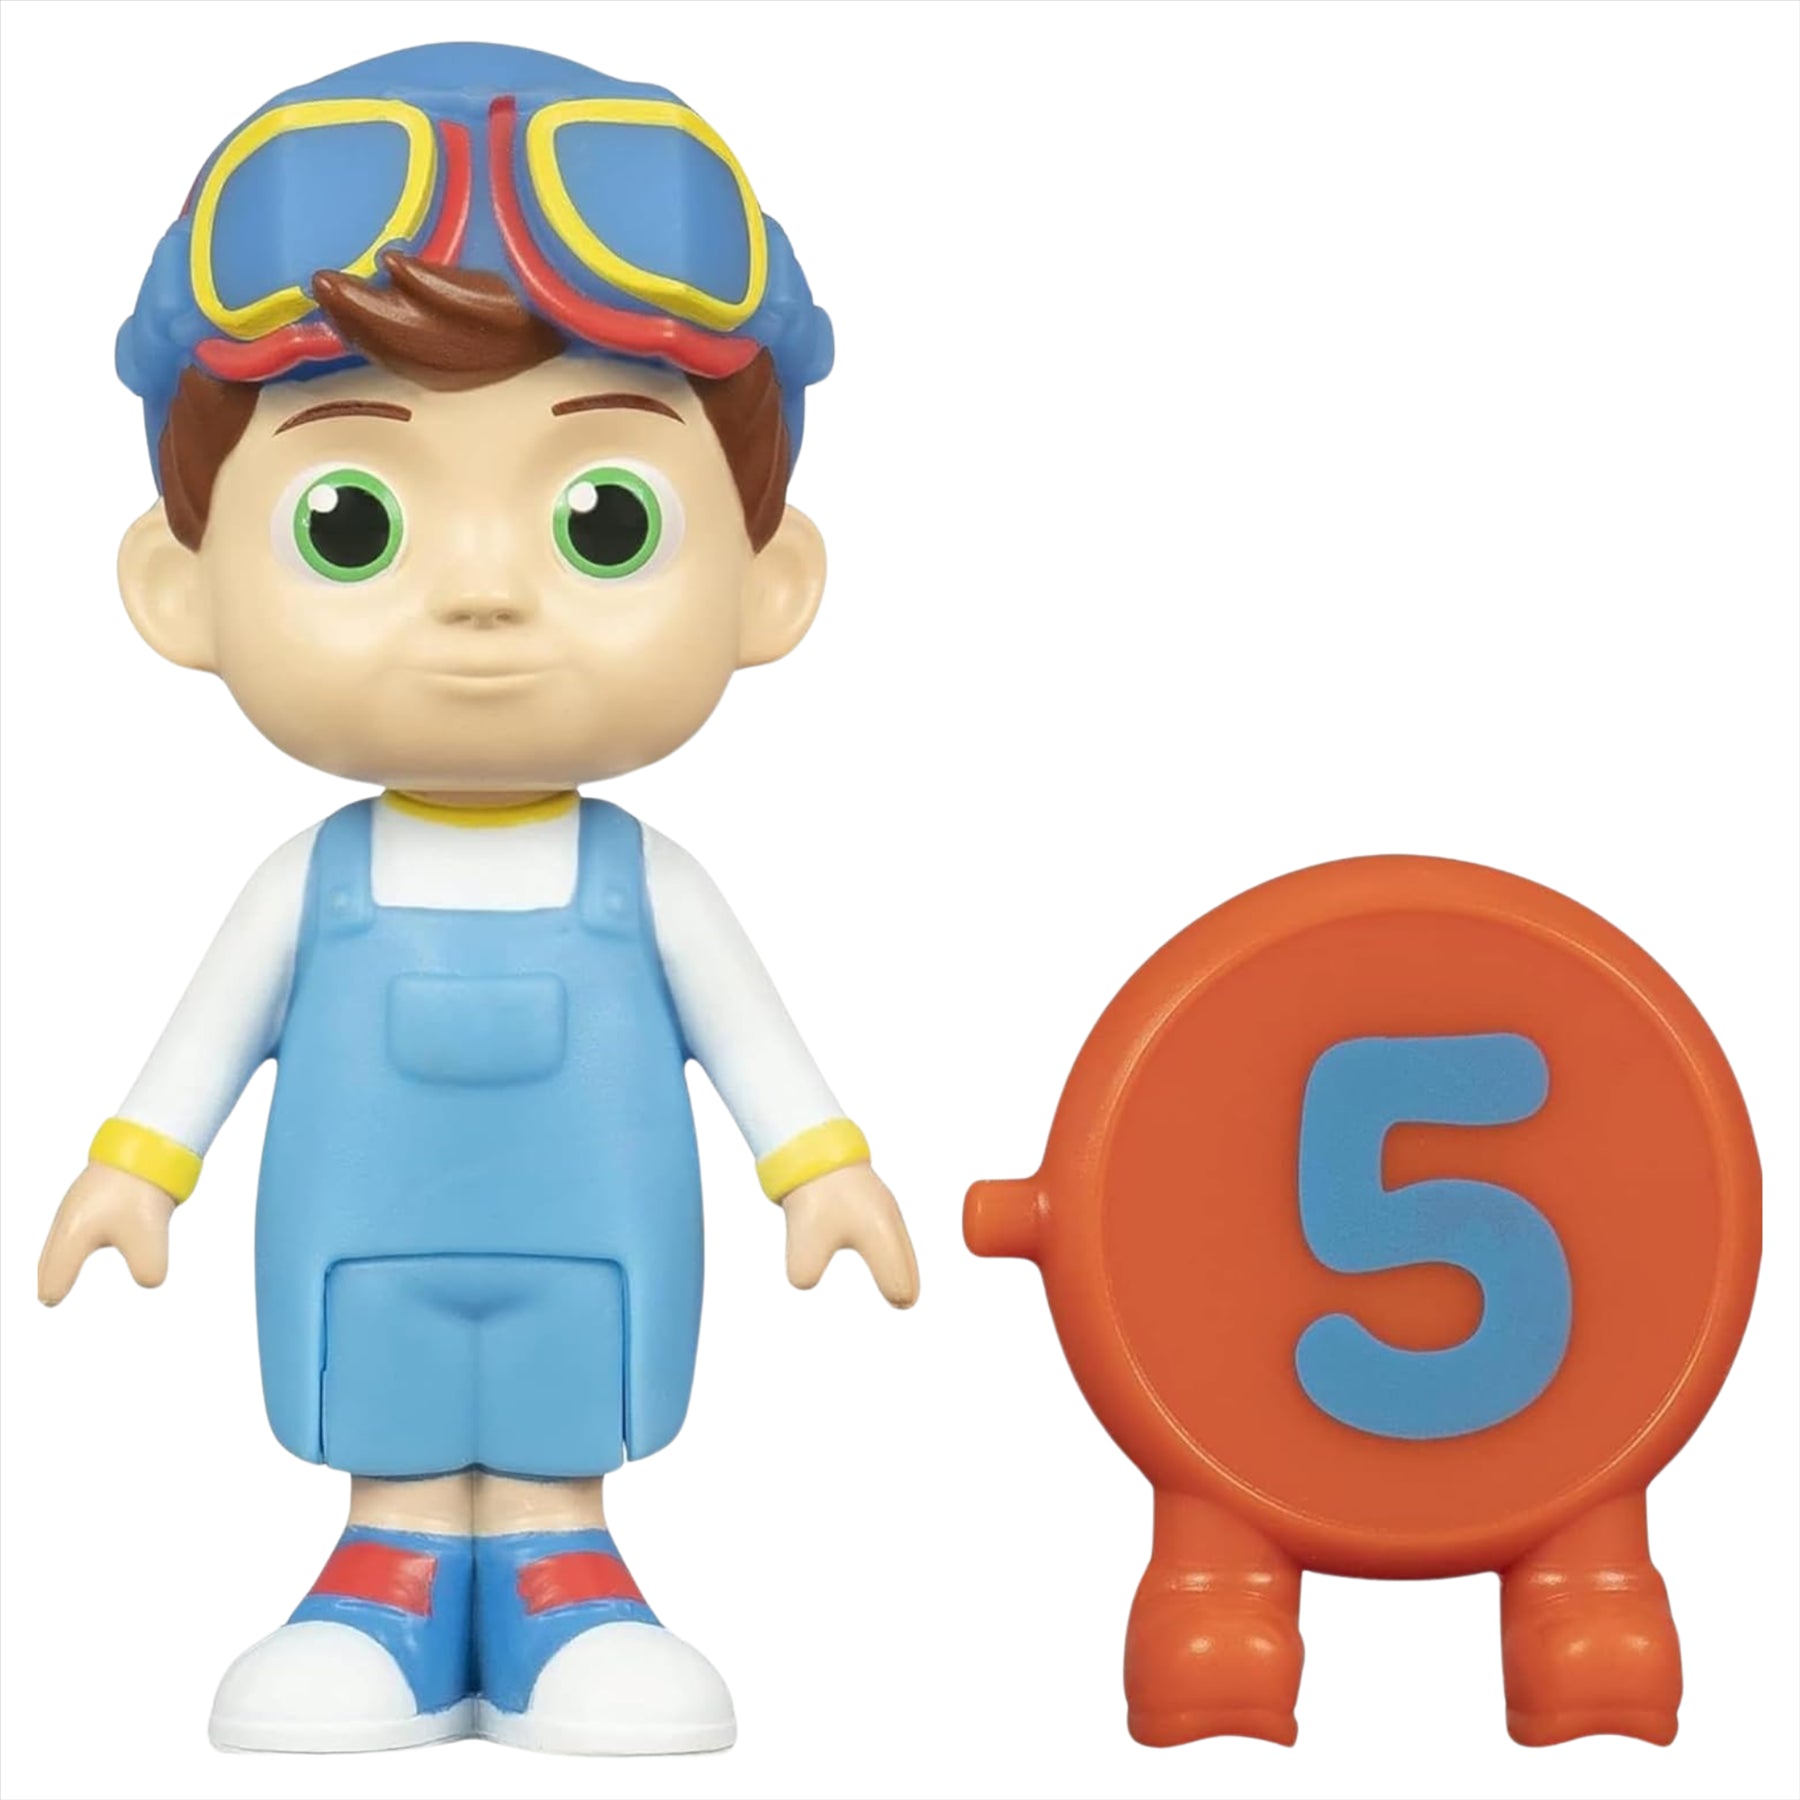 CoComelon Blind Capsule Number Character Articulated Figure Set - Puppy 20cm Plush and 3x Balls - Toptoys2u